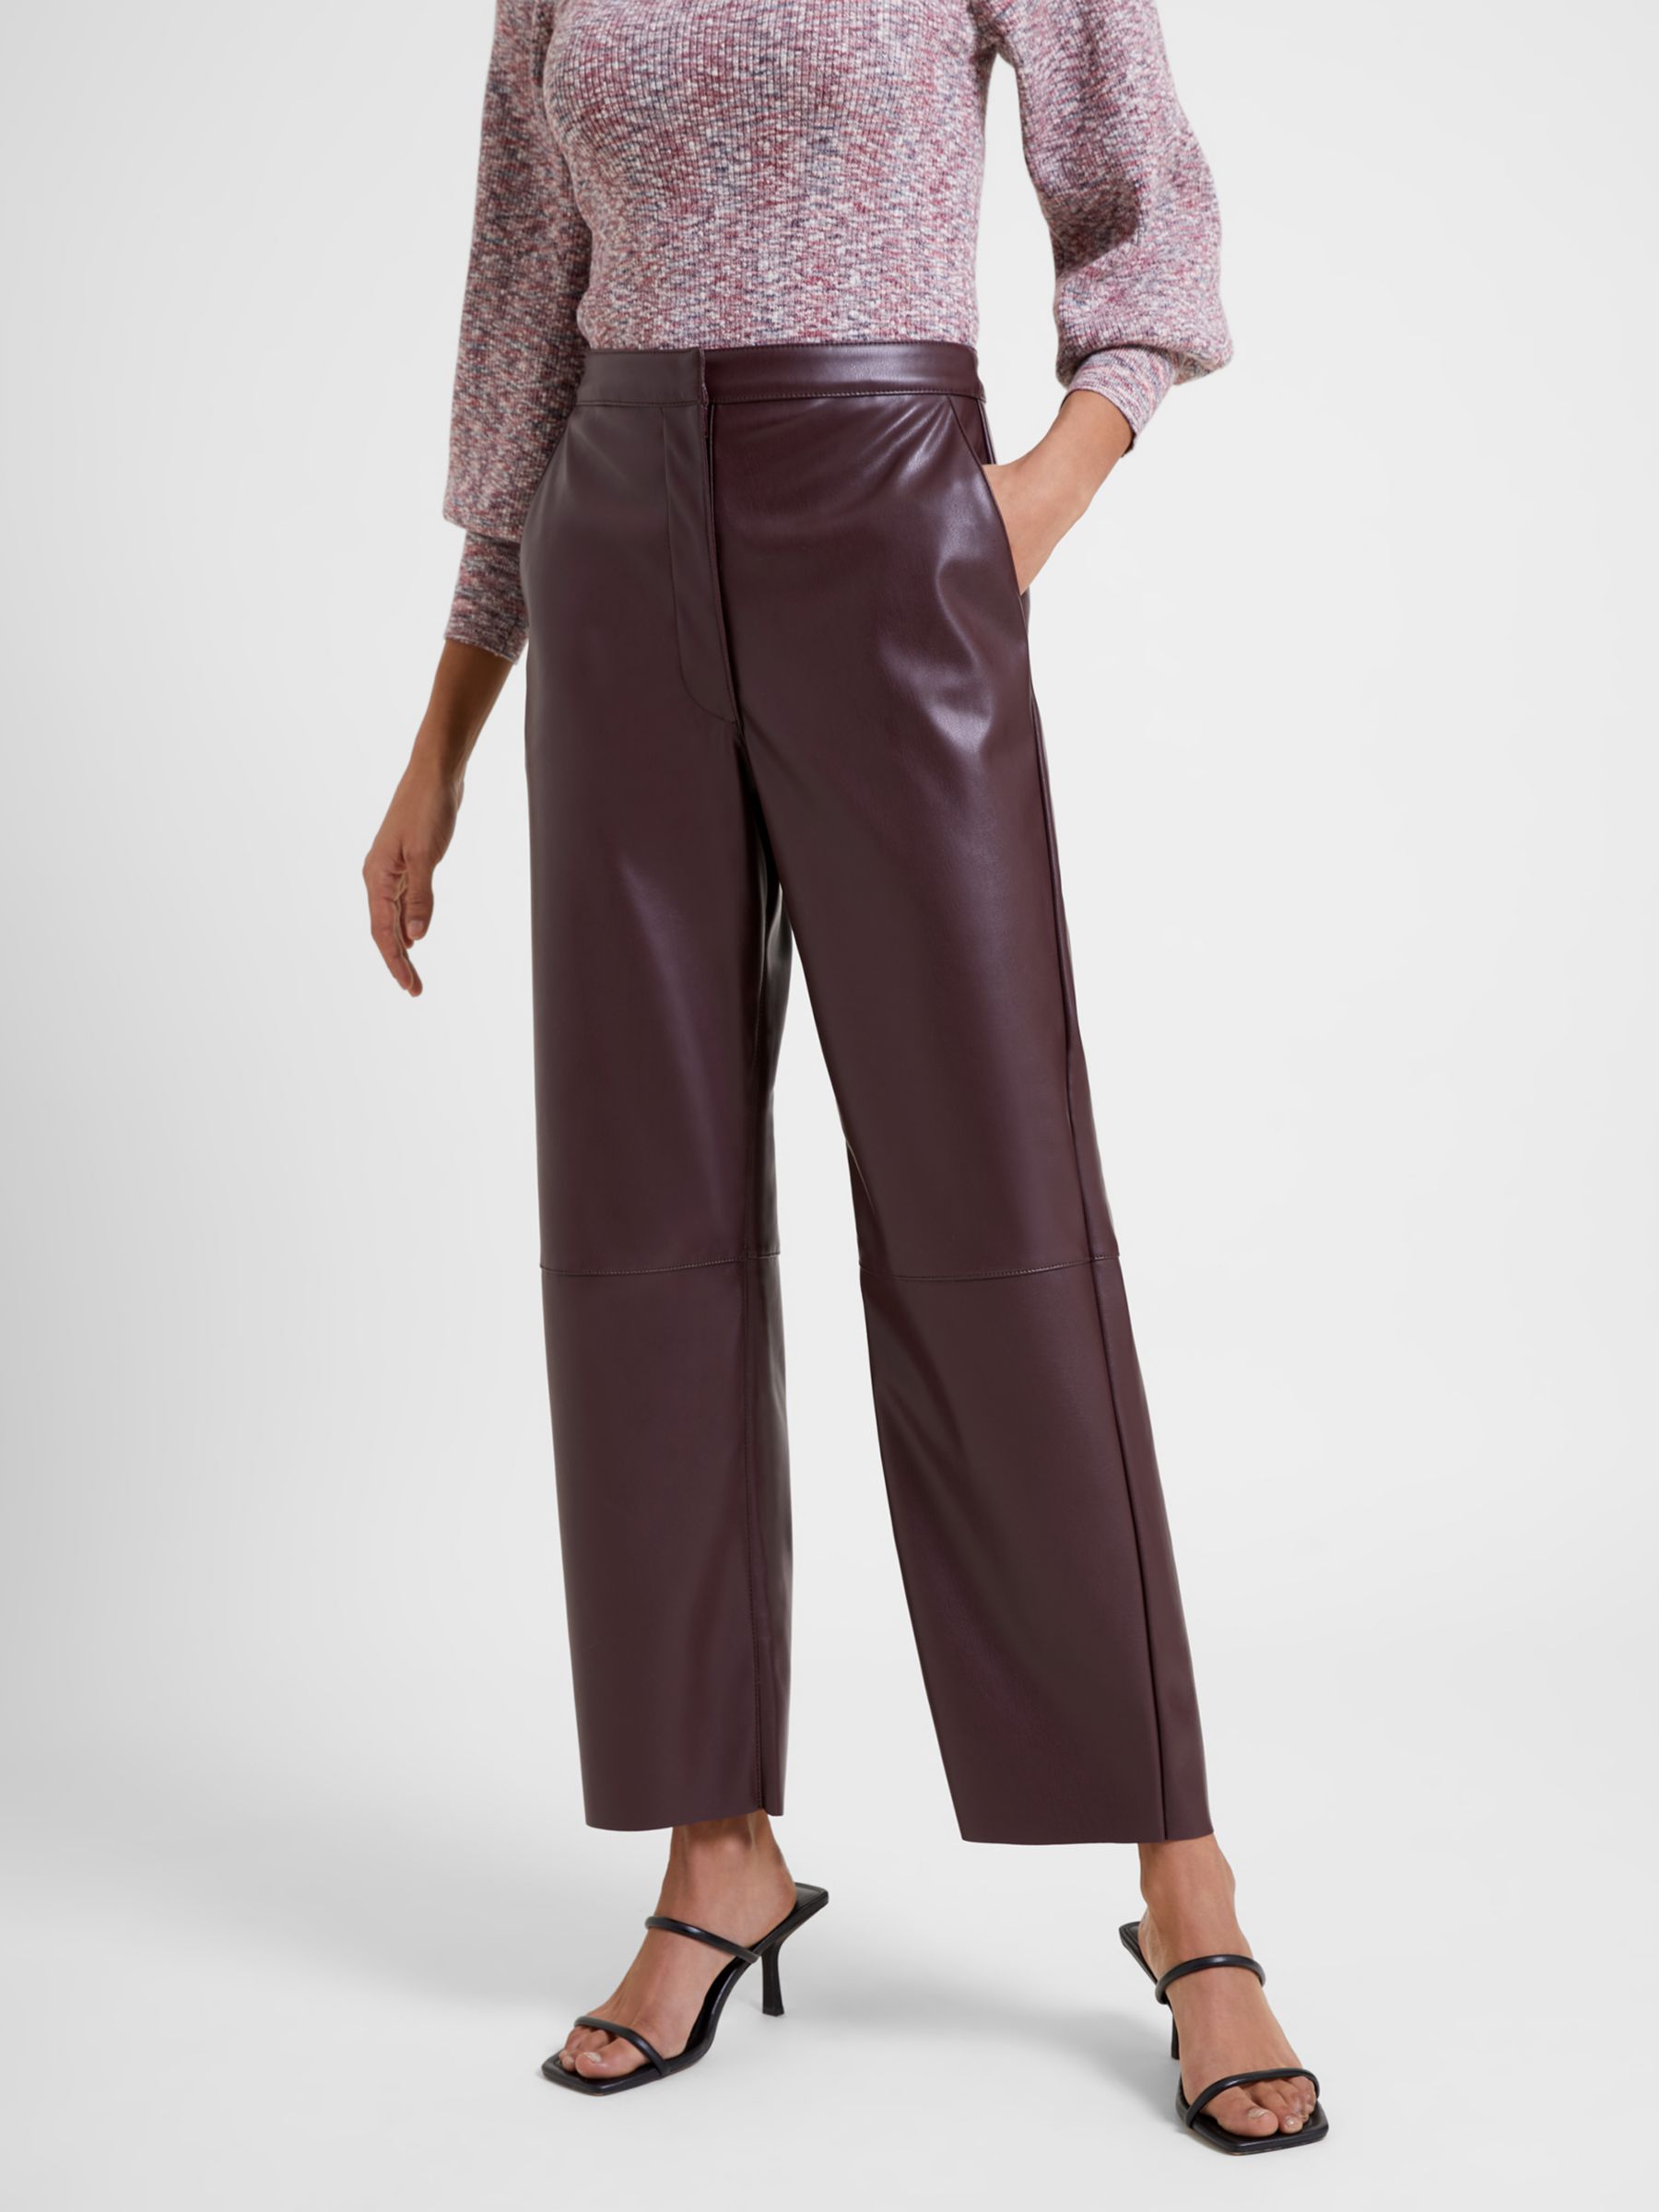 Buy Great Plains Ania Faux Leather Trousers Online at johnlewis.com